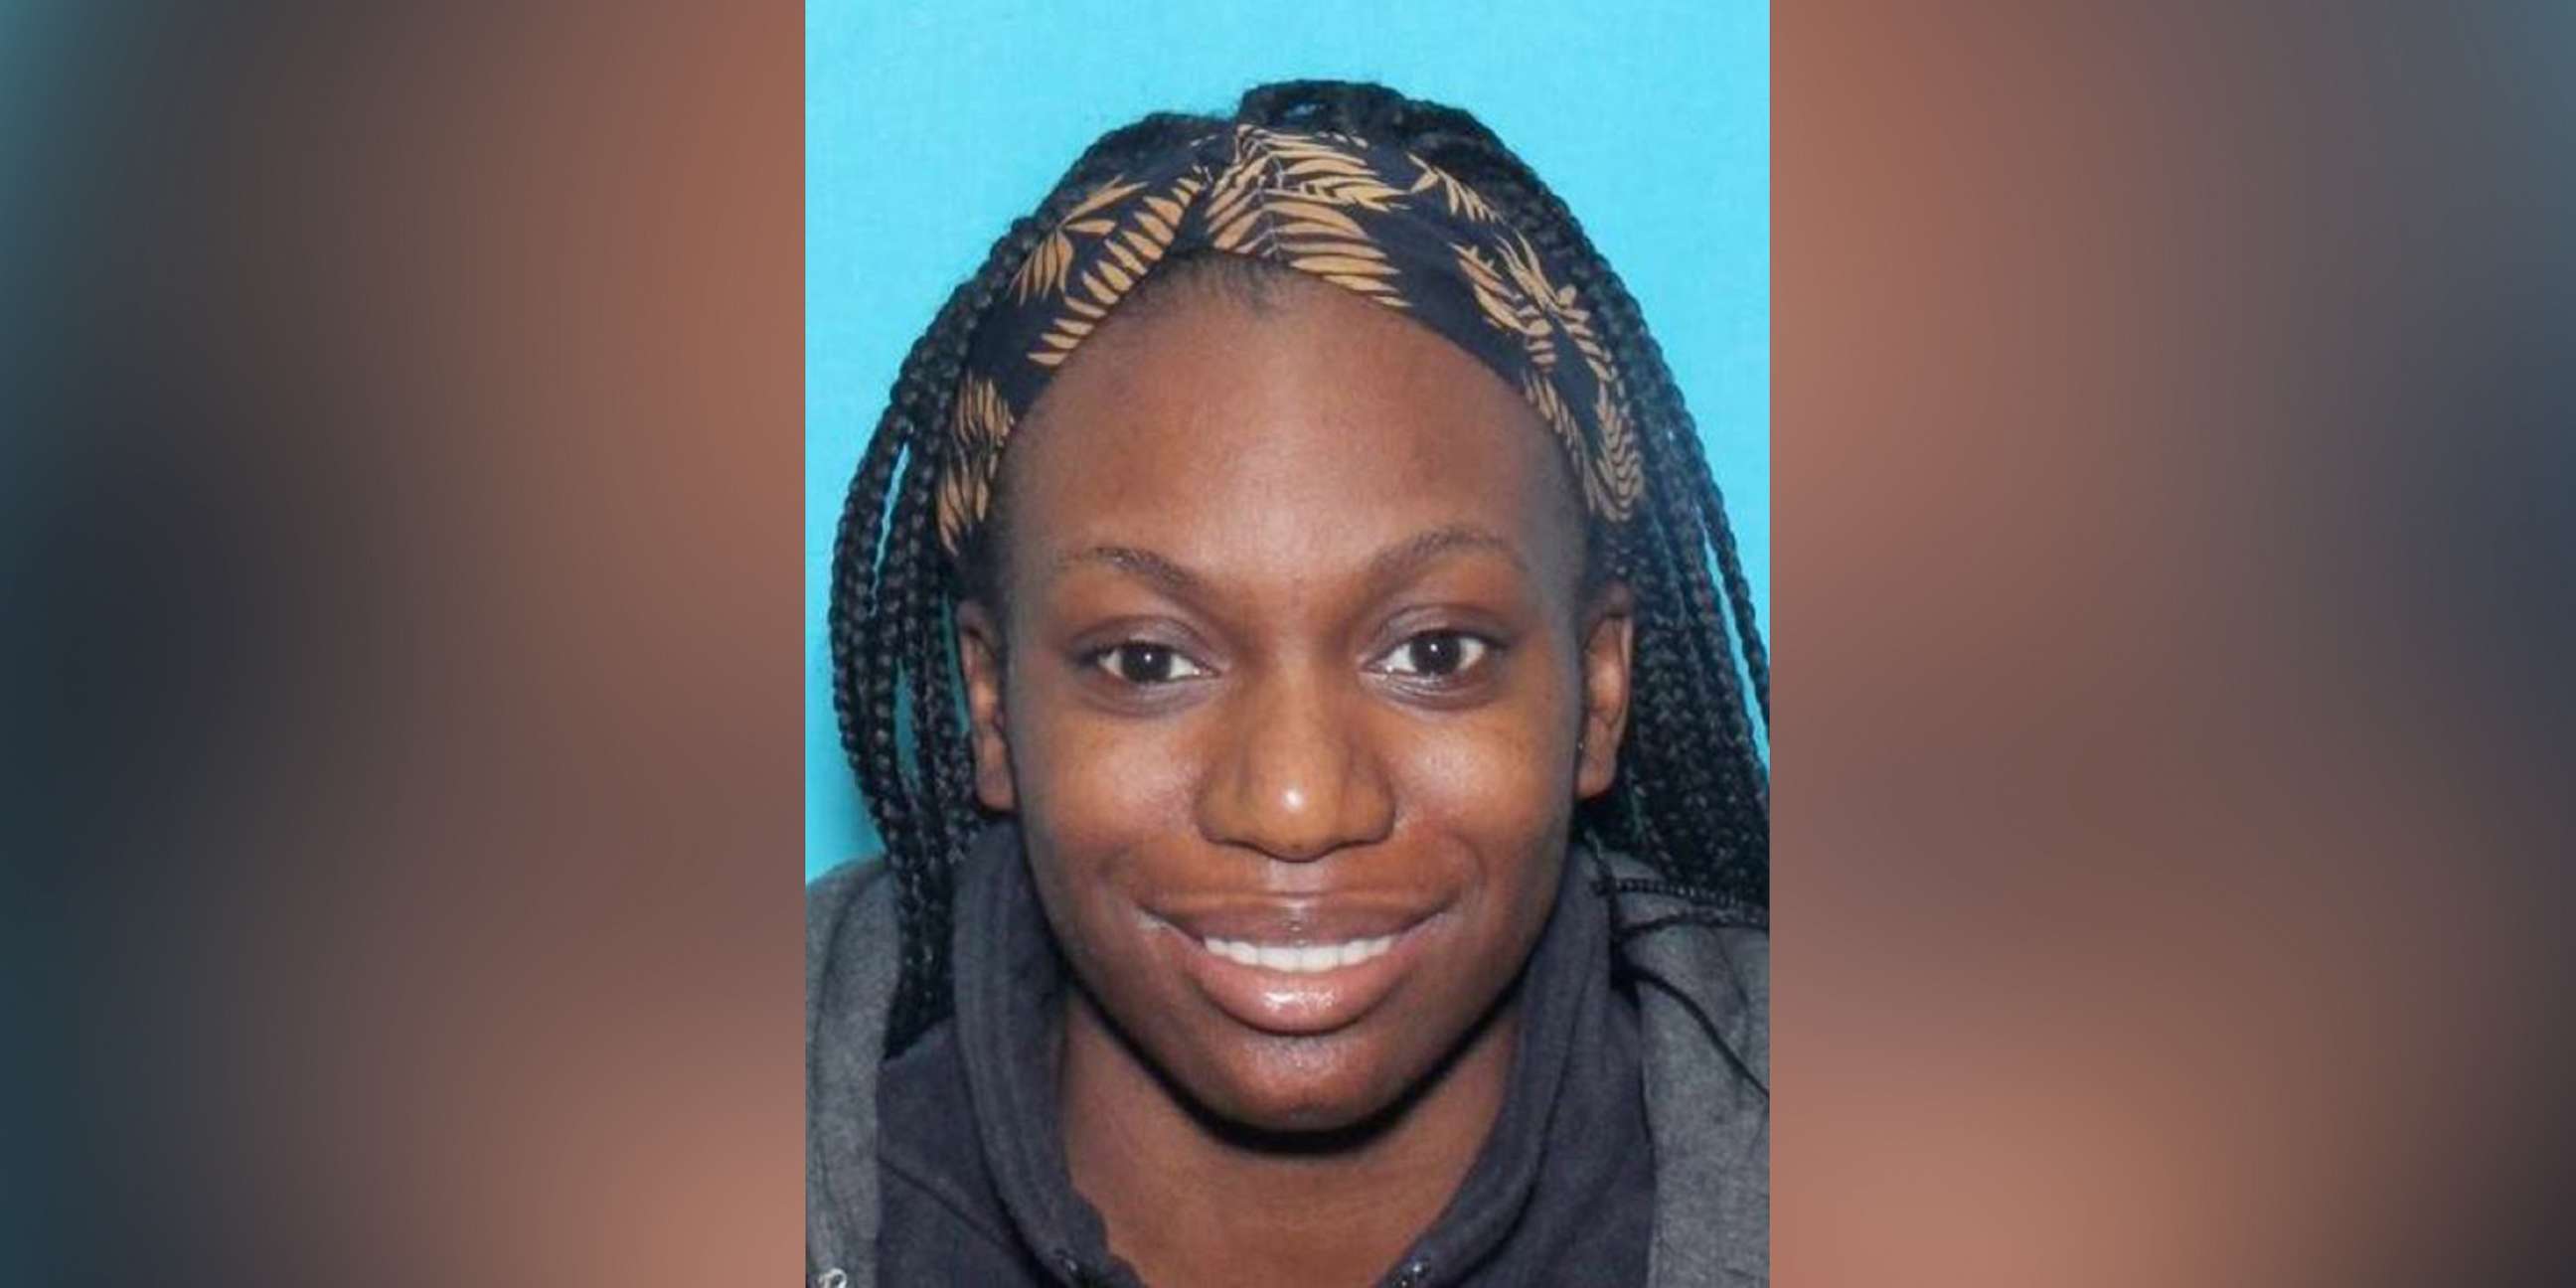 PHOTO: Police said Xandria Harris is wanted in connection with the shooting of two police officers in Kankakee County, Illinois, on Dec. 29, 2021.
